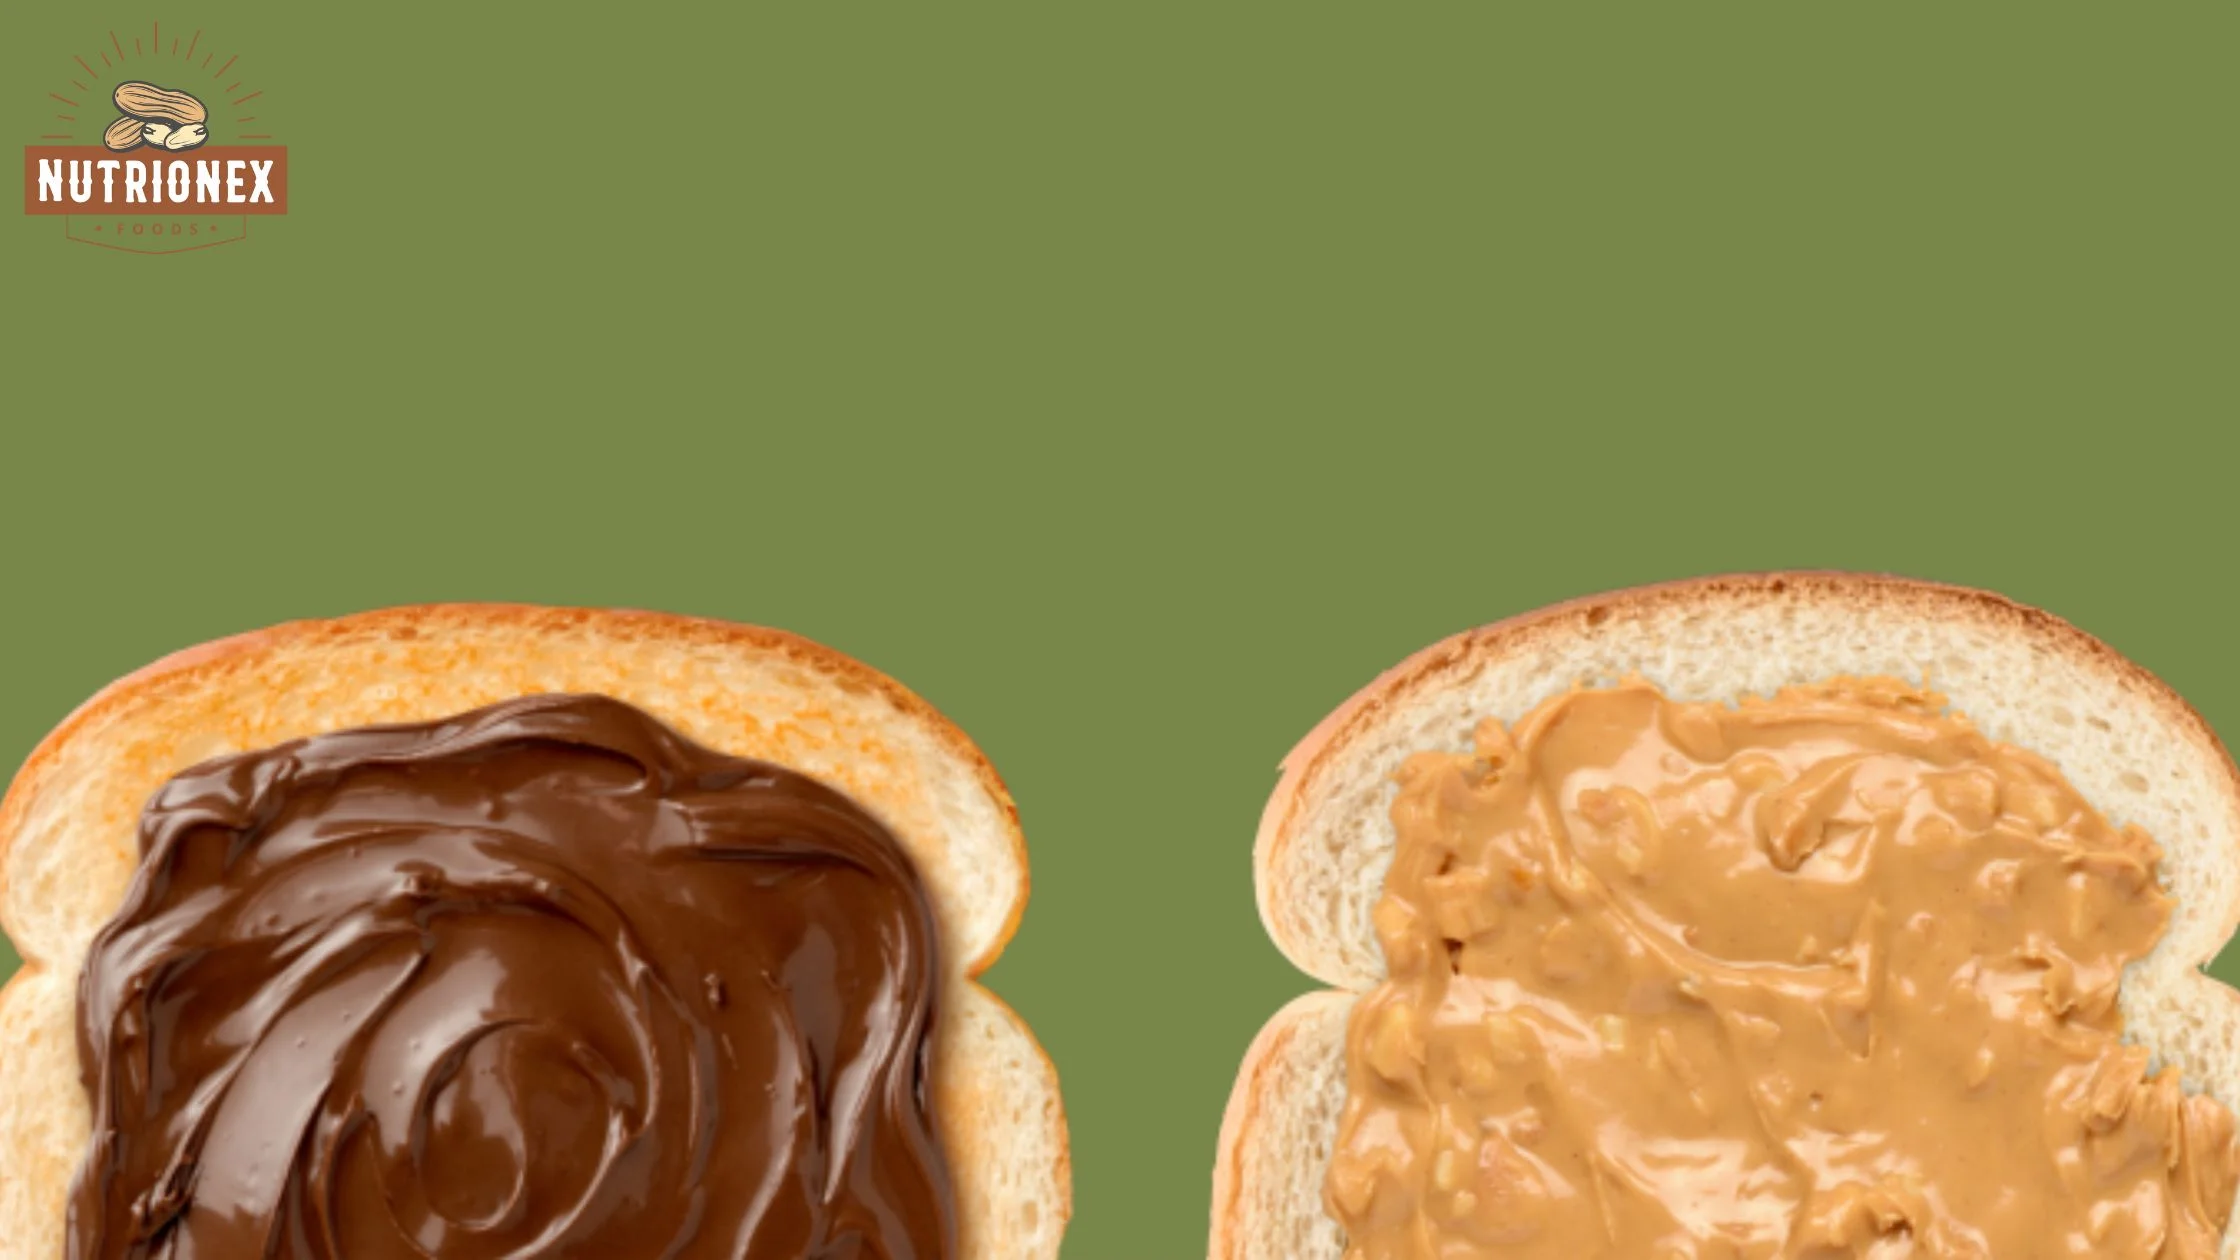 Is Nutella Healthier Than Peanut Butter